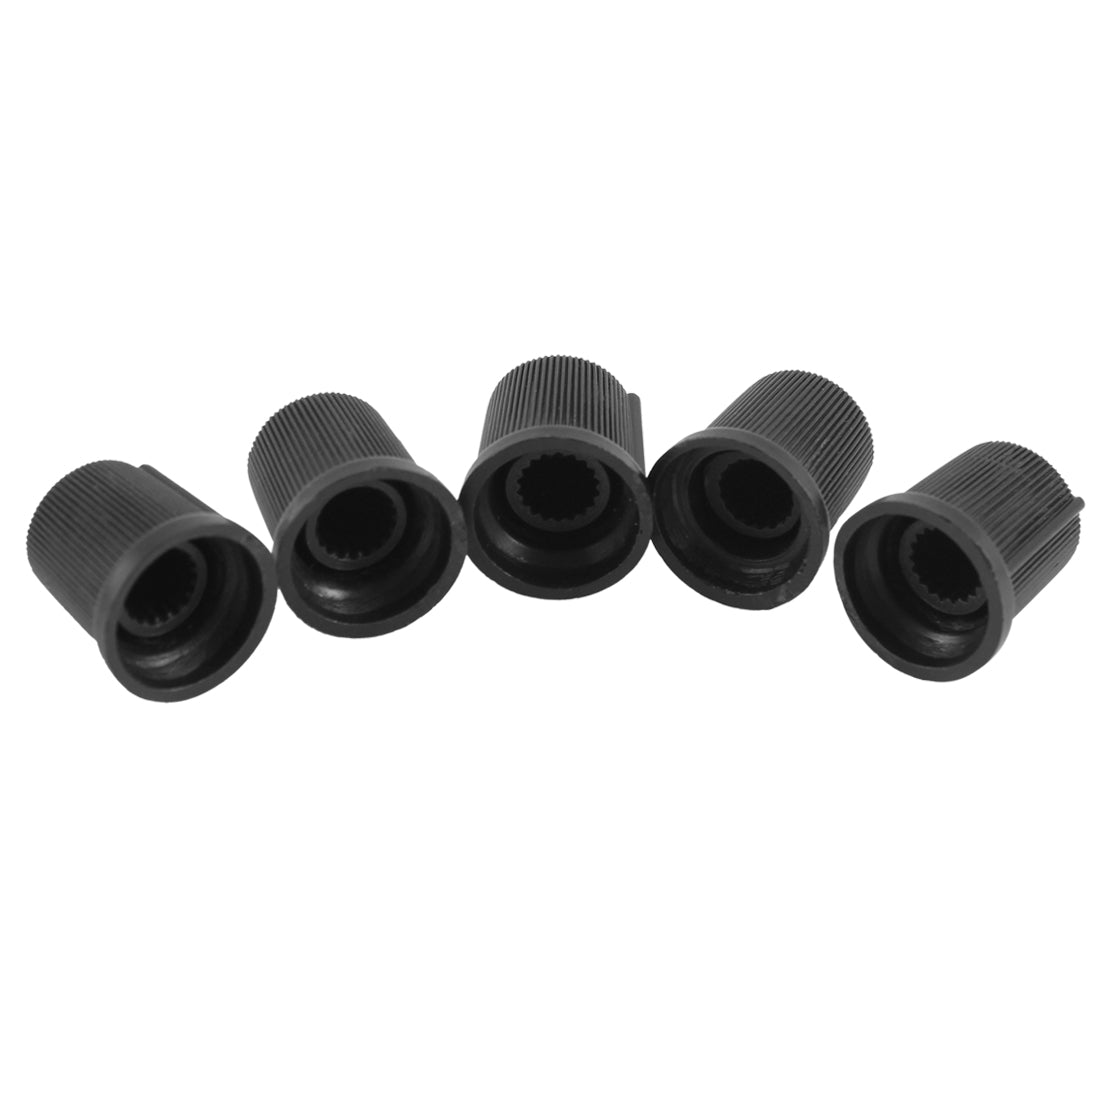 uxcell Uxcell 75Pcs Volume Control Rotary Knobs for 6mm Dia Knurled Shaft Potentiometer